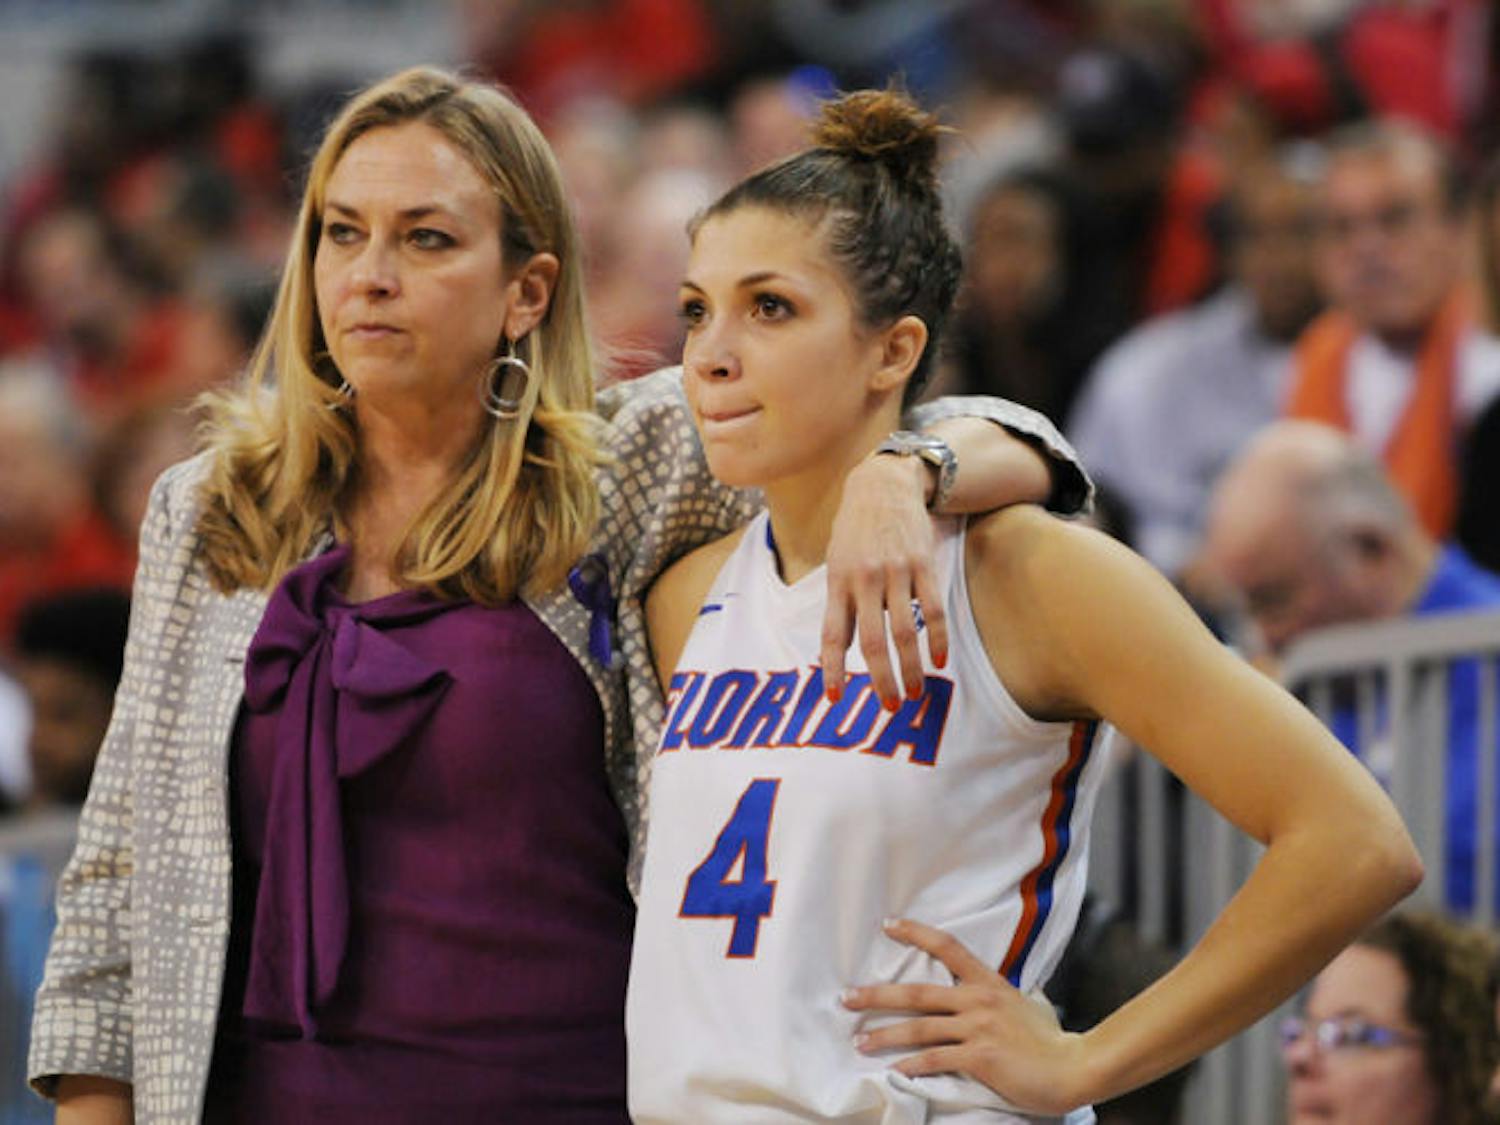 Coach Amanda Butler and guard Carlie Needles stand on the sideline during Florida’s 68-62 loss to Georgia on Sunday in the O’Connell Center. Needles scored six points on two three-point shots in Florida’s 89-69 loss to Tennessee on Thursday at Thompson-Boling Arena in Knoxville, Tenn.